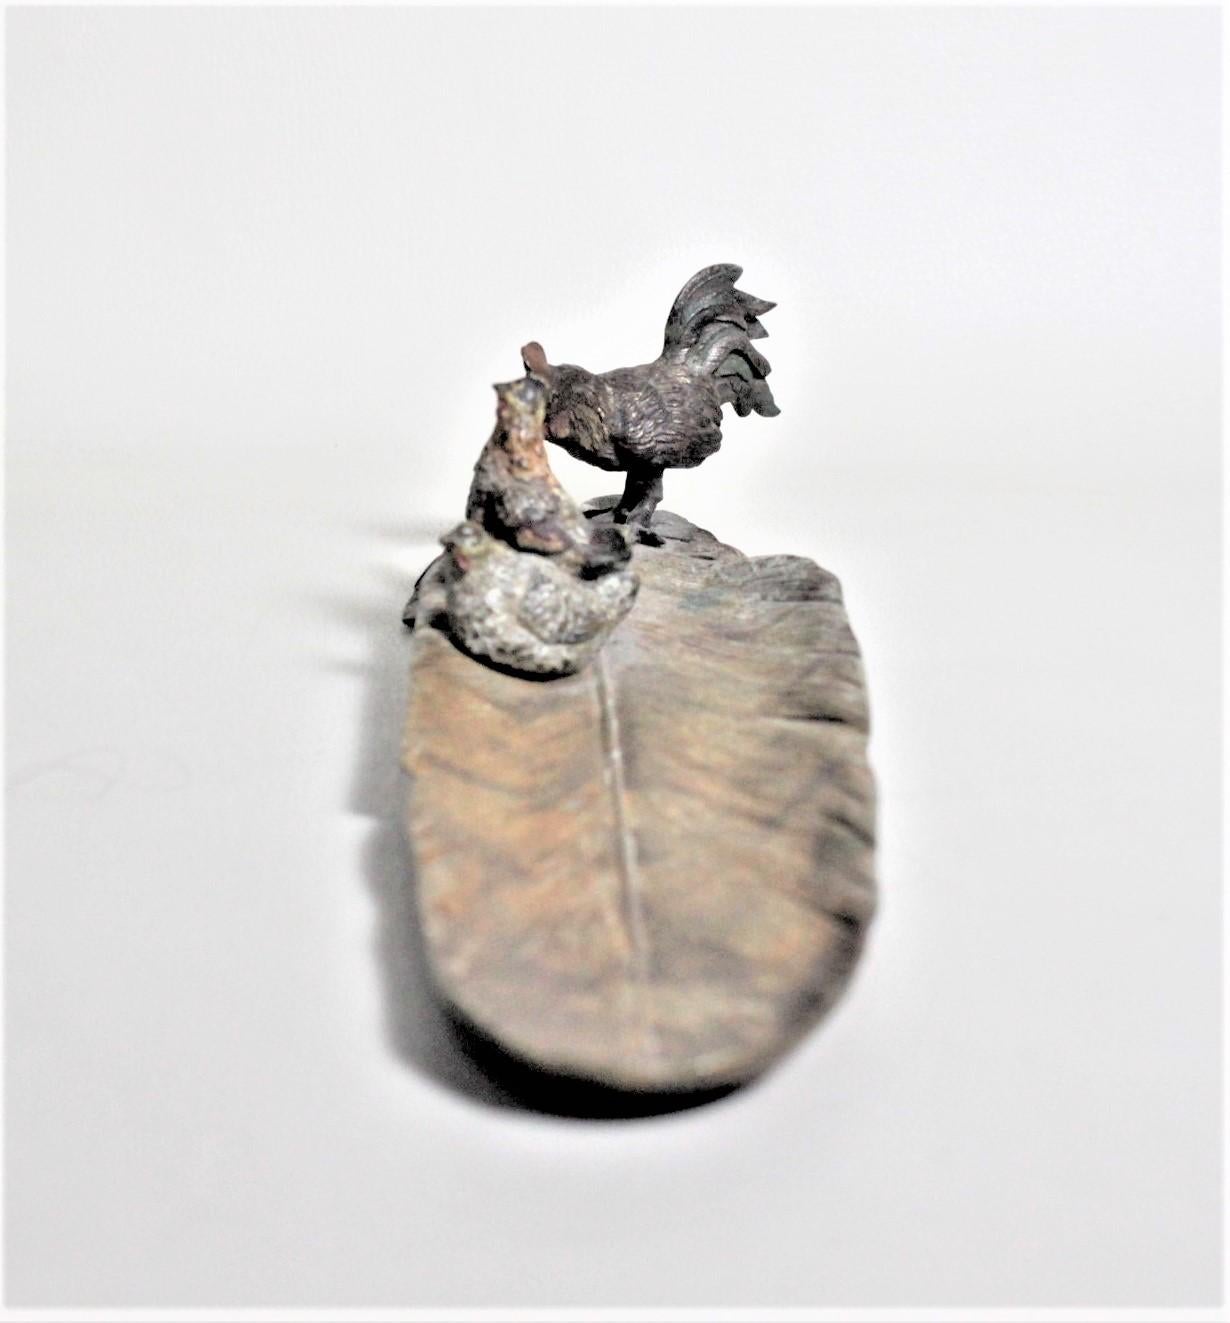 Cast Antique Austrian Cold-Painted Bronze of a Rooster and Chickens Perched on a Leaf